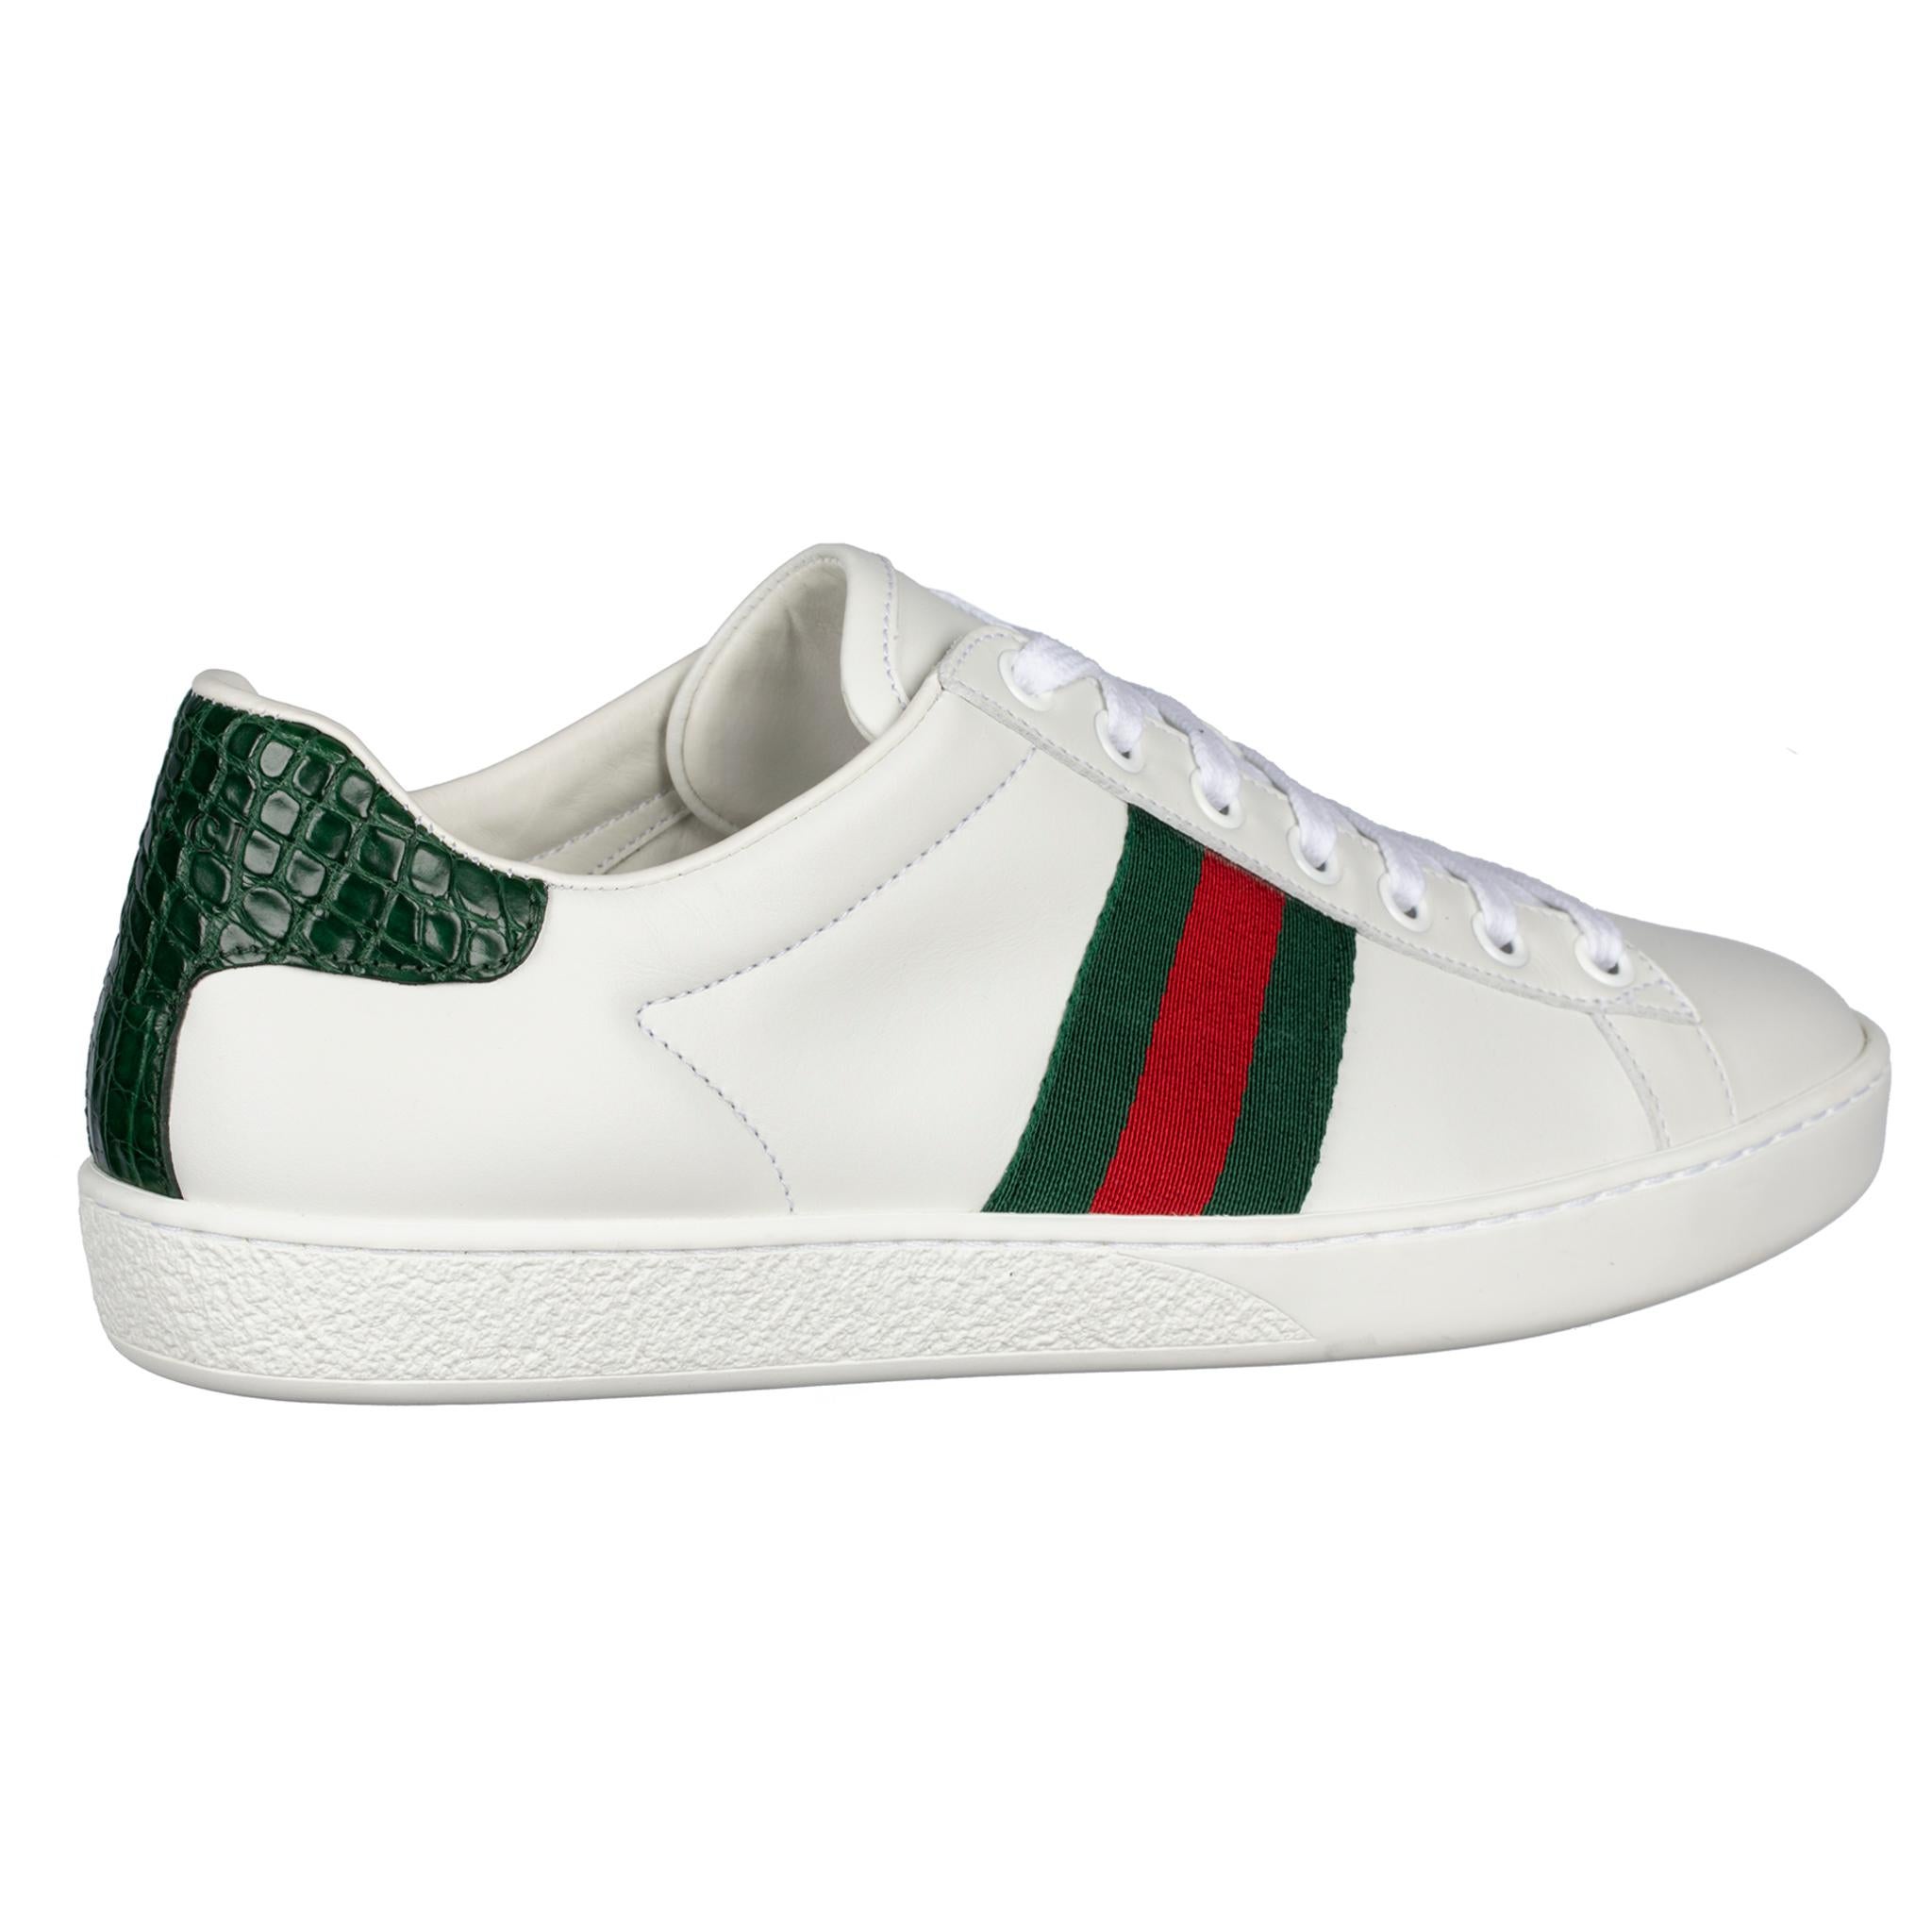 Gucci Ace Sneaker White Green & Red Stripe

Brand:

Cucci

Product:

Ace Sneakers With Embossed Crocodile Leather

Size:

38 It

Colour:

White, Green & Red

Material:

Smooth Leather & Embossed Crocoidle

Condition:

Preloved; Excellent (Like